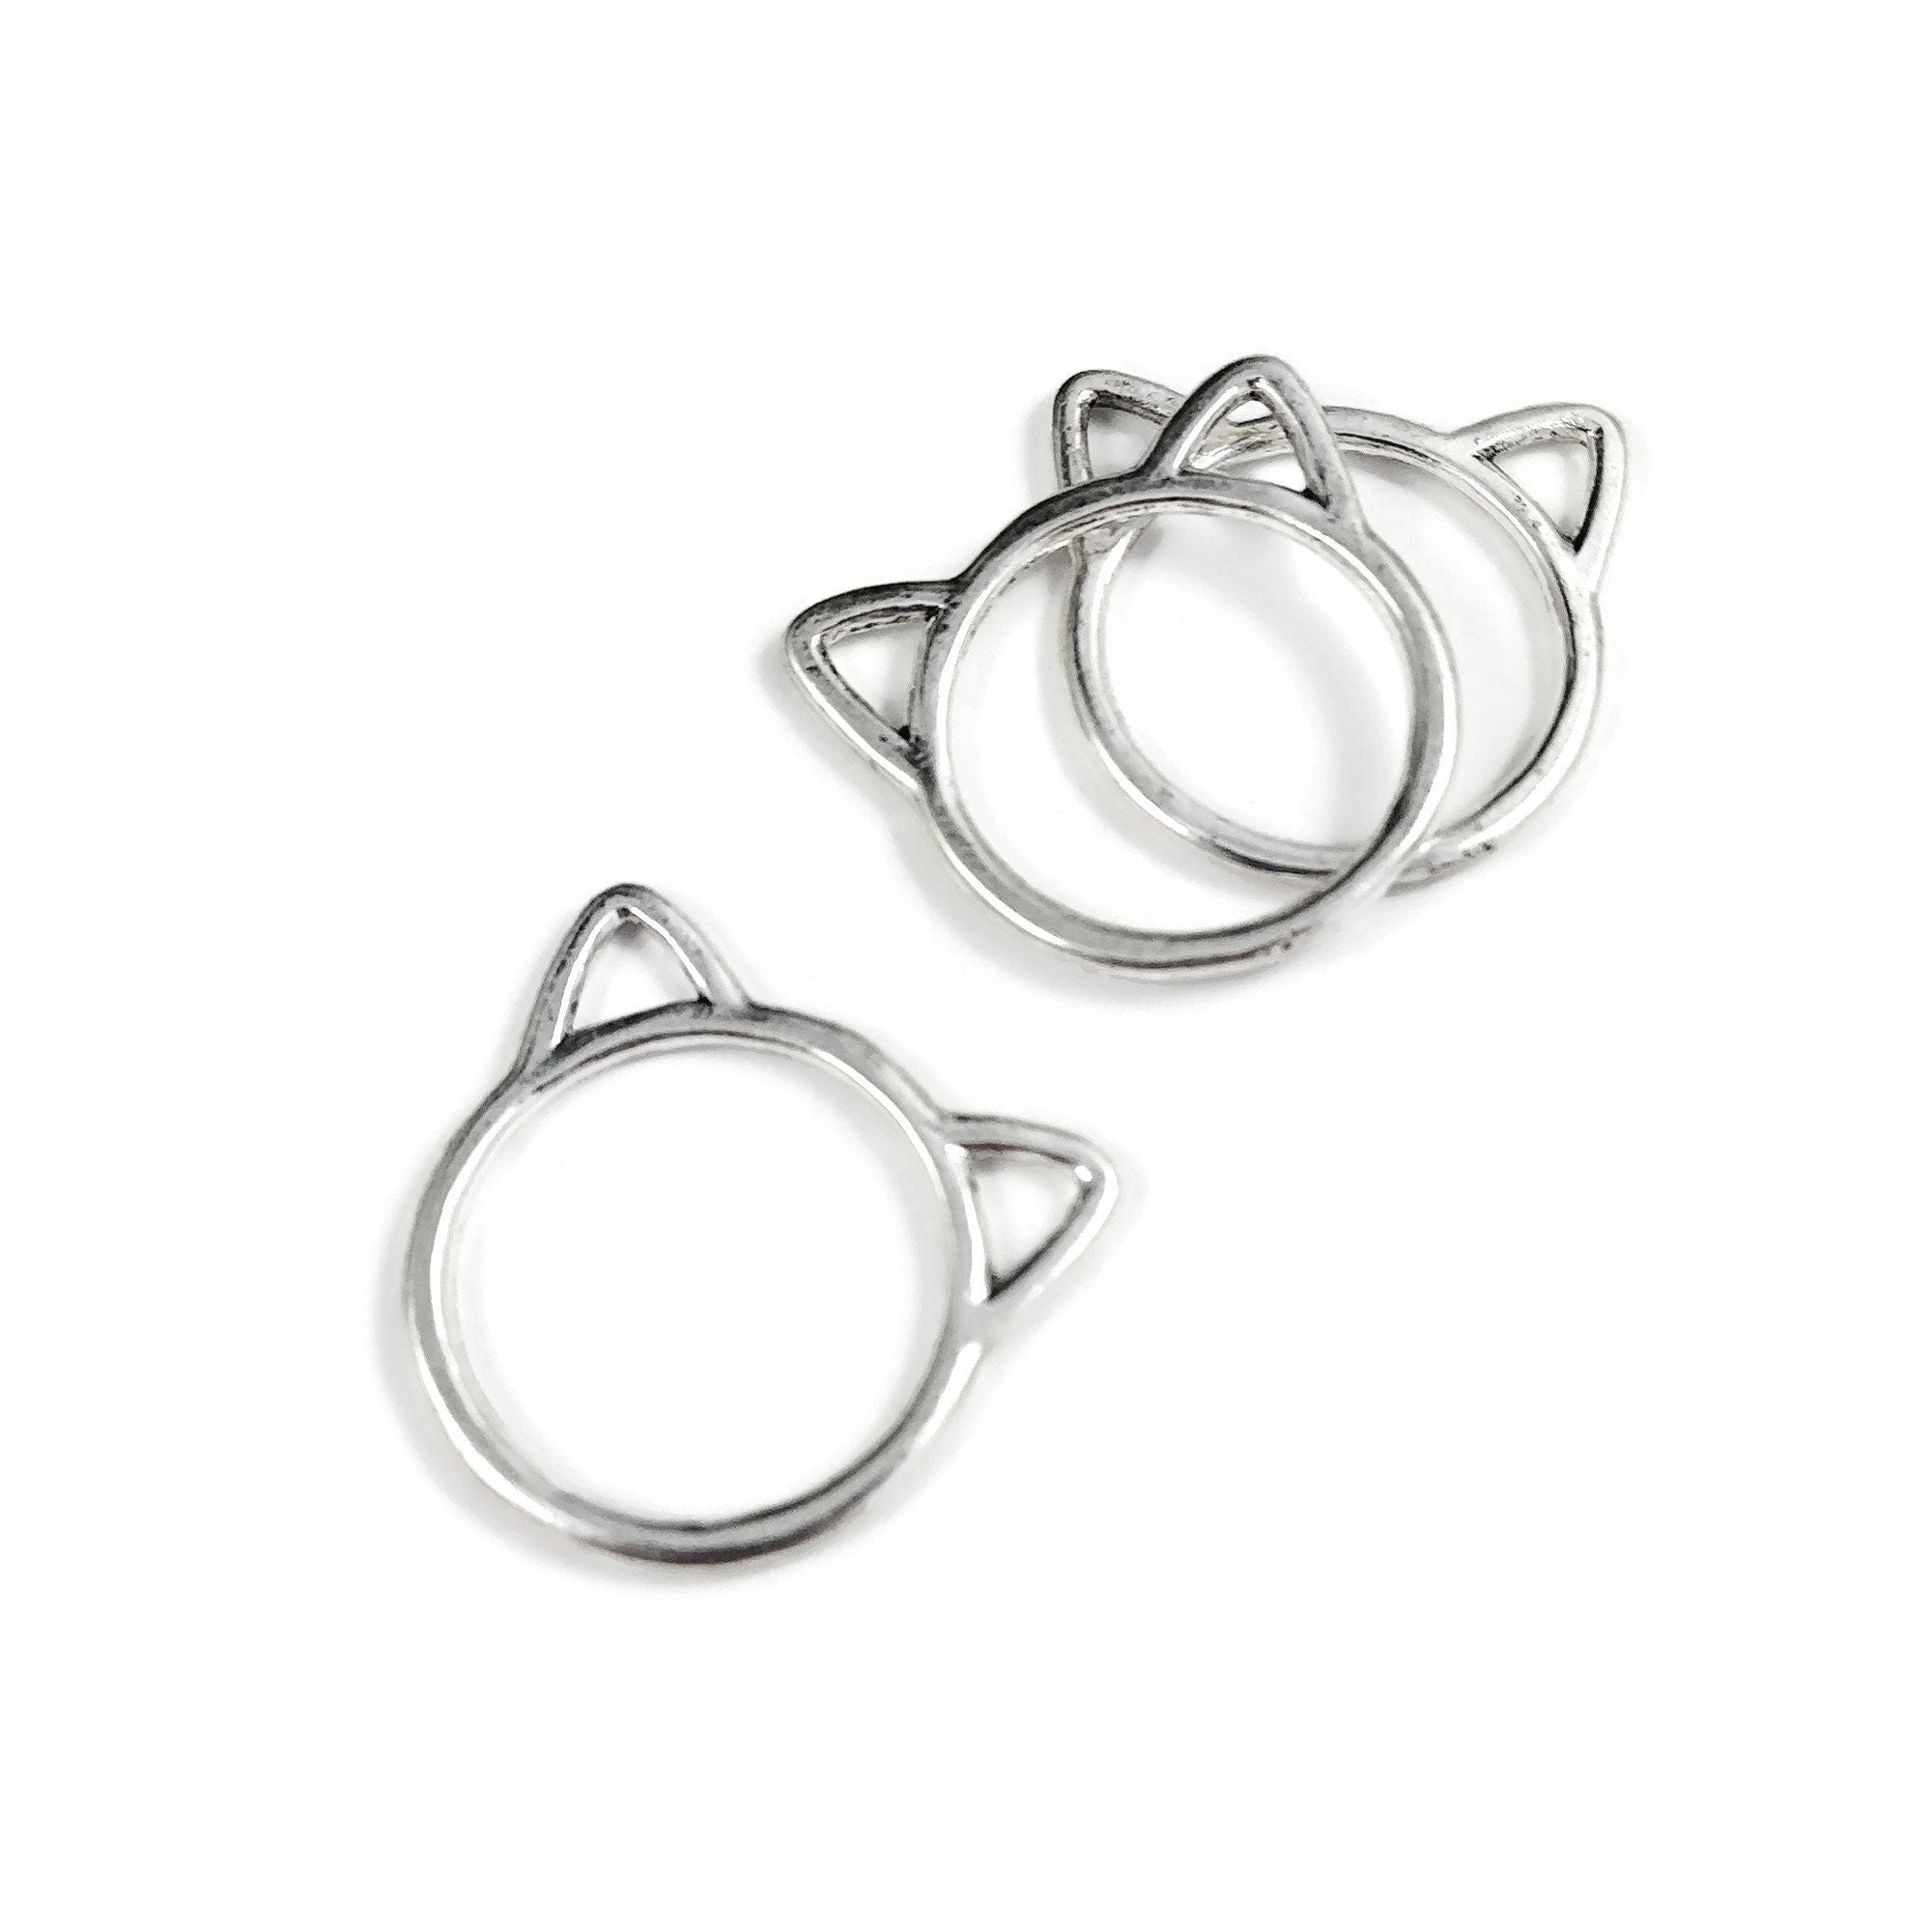 10pcs Charms Cat Antique Silver Color Cute Cat Pendant Charms Kawaii Cat  Charms For Jewelry Making